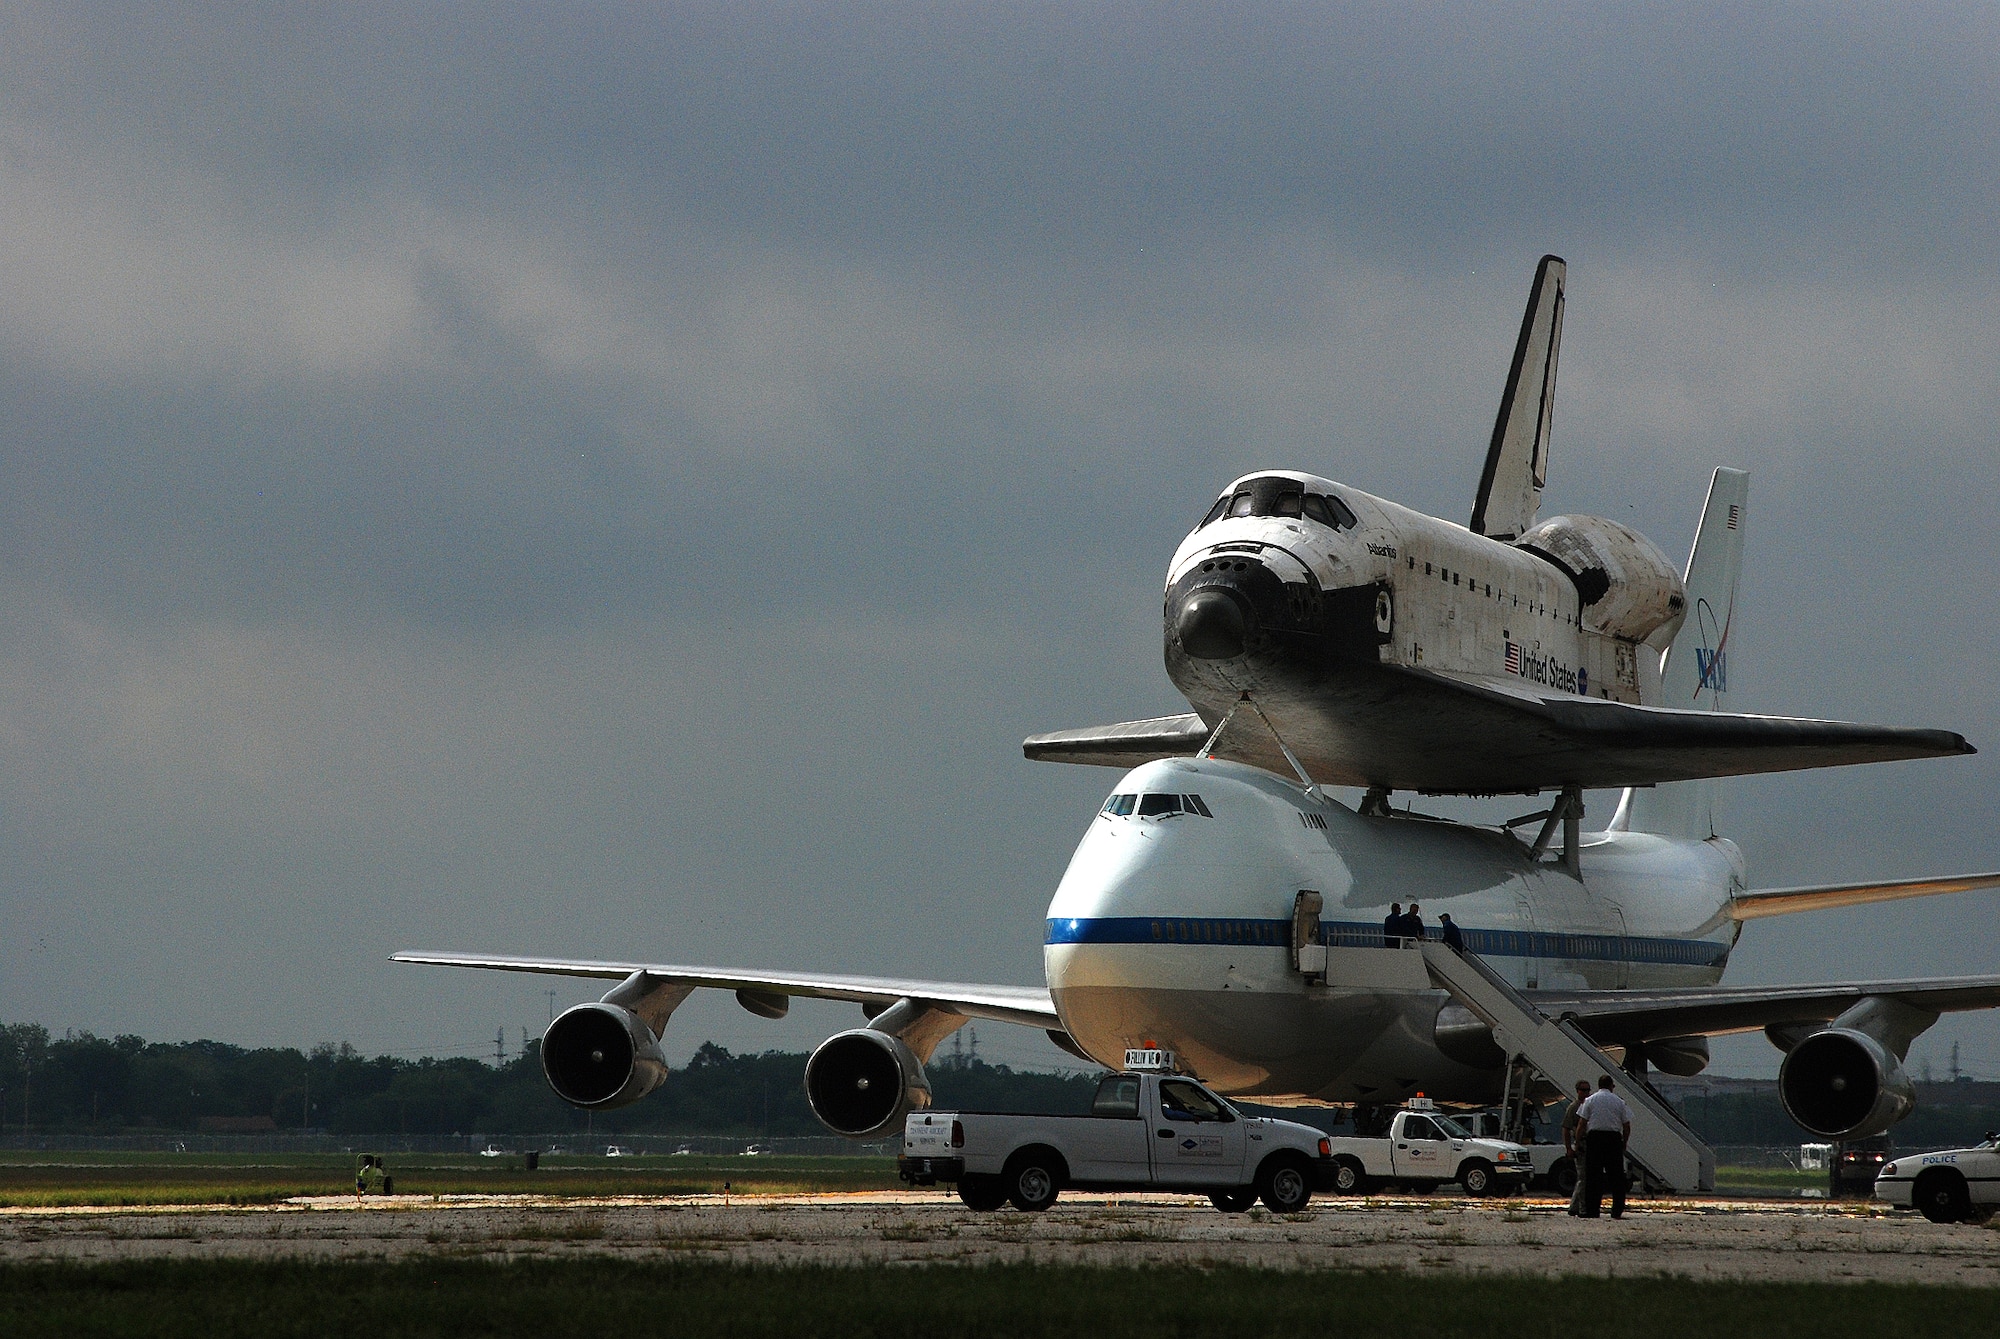 Space Shuttle Atlantis made a pit-stop, to a parking area near the 433rd Airlift Wing at Lackland AFB, Texas, today (June 2, 2009). The shuttle is on its way home to Kennedy Space Center, Fla., from the landing site at Edwards AFB, Calif. According to Ms. Candrea Thomas, public affairs officer at NASA's Kennedy Space Center, Atlantis was returning from "STS Mission 125" where the crew serviced and upgraded the Hubble Space Telescope on the International Space Station. Weather caused a delay and relocation of the landing site. After landing at Edwards AFB, Atlantis was "piggybacked" onto a modified Boeing 747 called a shuttle carrier. The 747 then flew from Edwards to El Paso, Texas and spent the night waiting for severe thunder storms to pass. Next stop was the Lackland AFB flight line. The shuttle carrier took on fuel while parked near the Alamo Wing"s C-5 Galaxy parking ramp. From here, the shuttle plans a stop in Columbus, Ohio and is expected back in Florida early in the evening.  (U.S. Air Force Photo/Airman Brian McGloin)